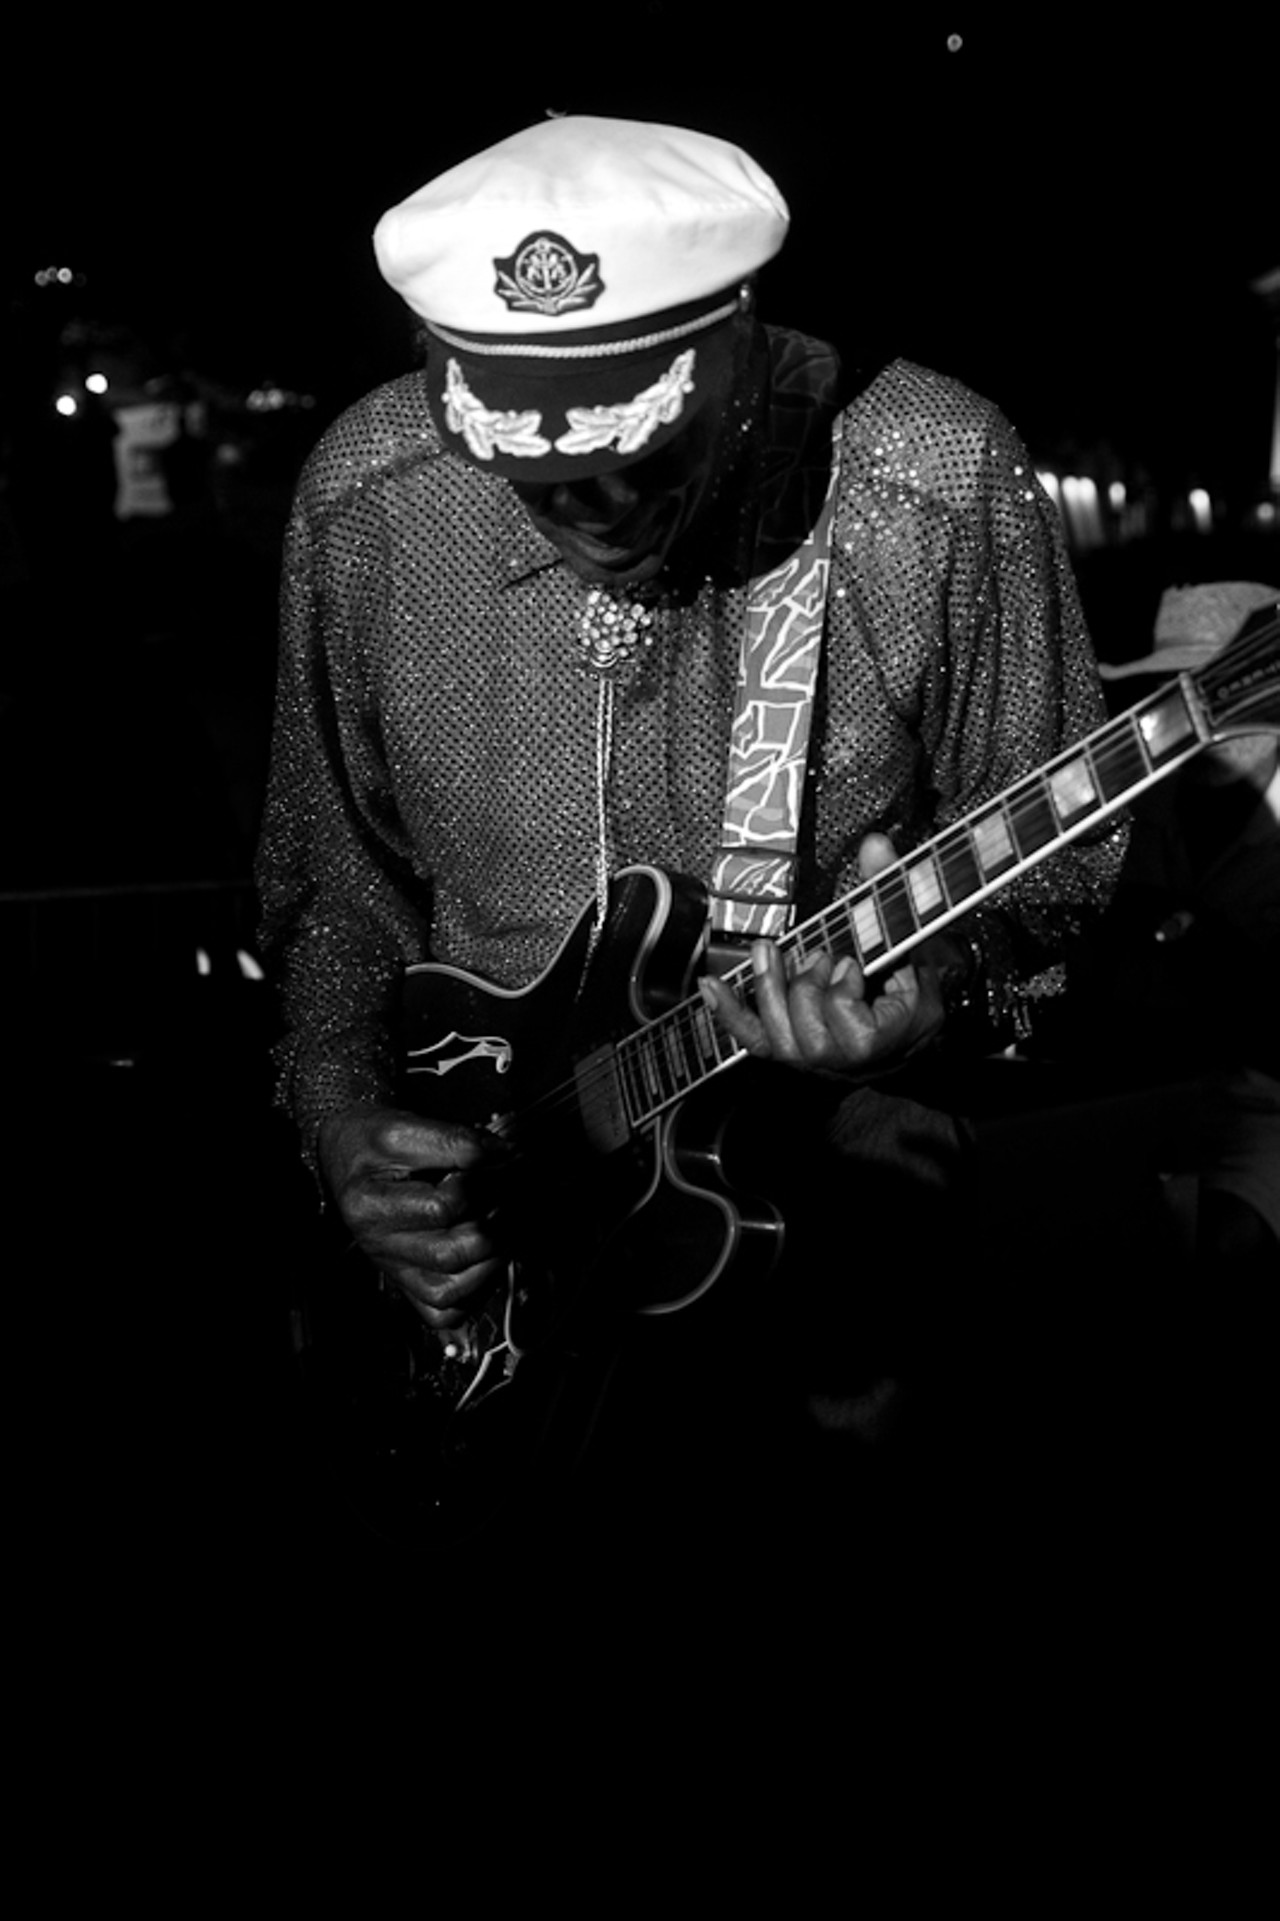 Chuck Berry performing at Kiener Plaza in St. Louis.